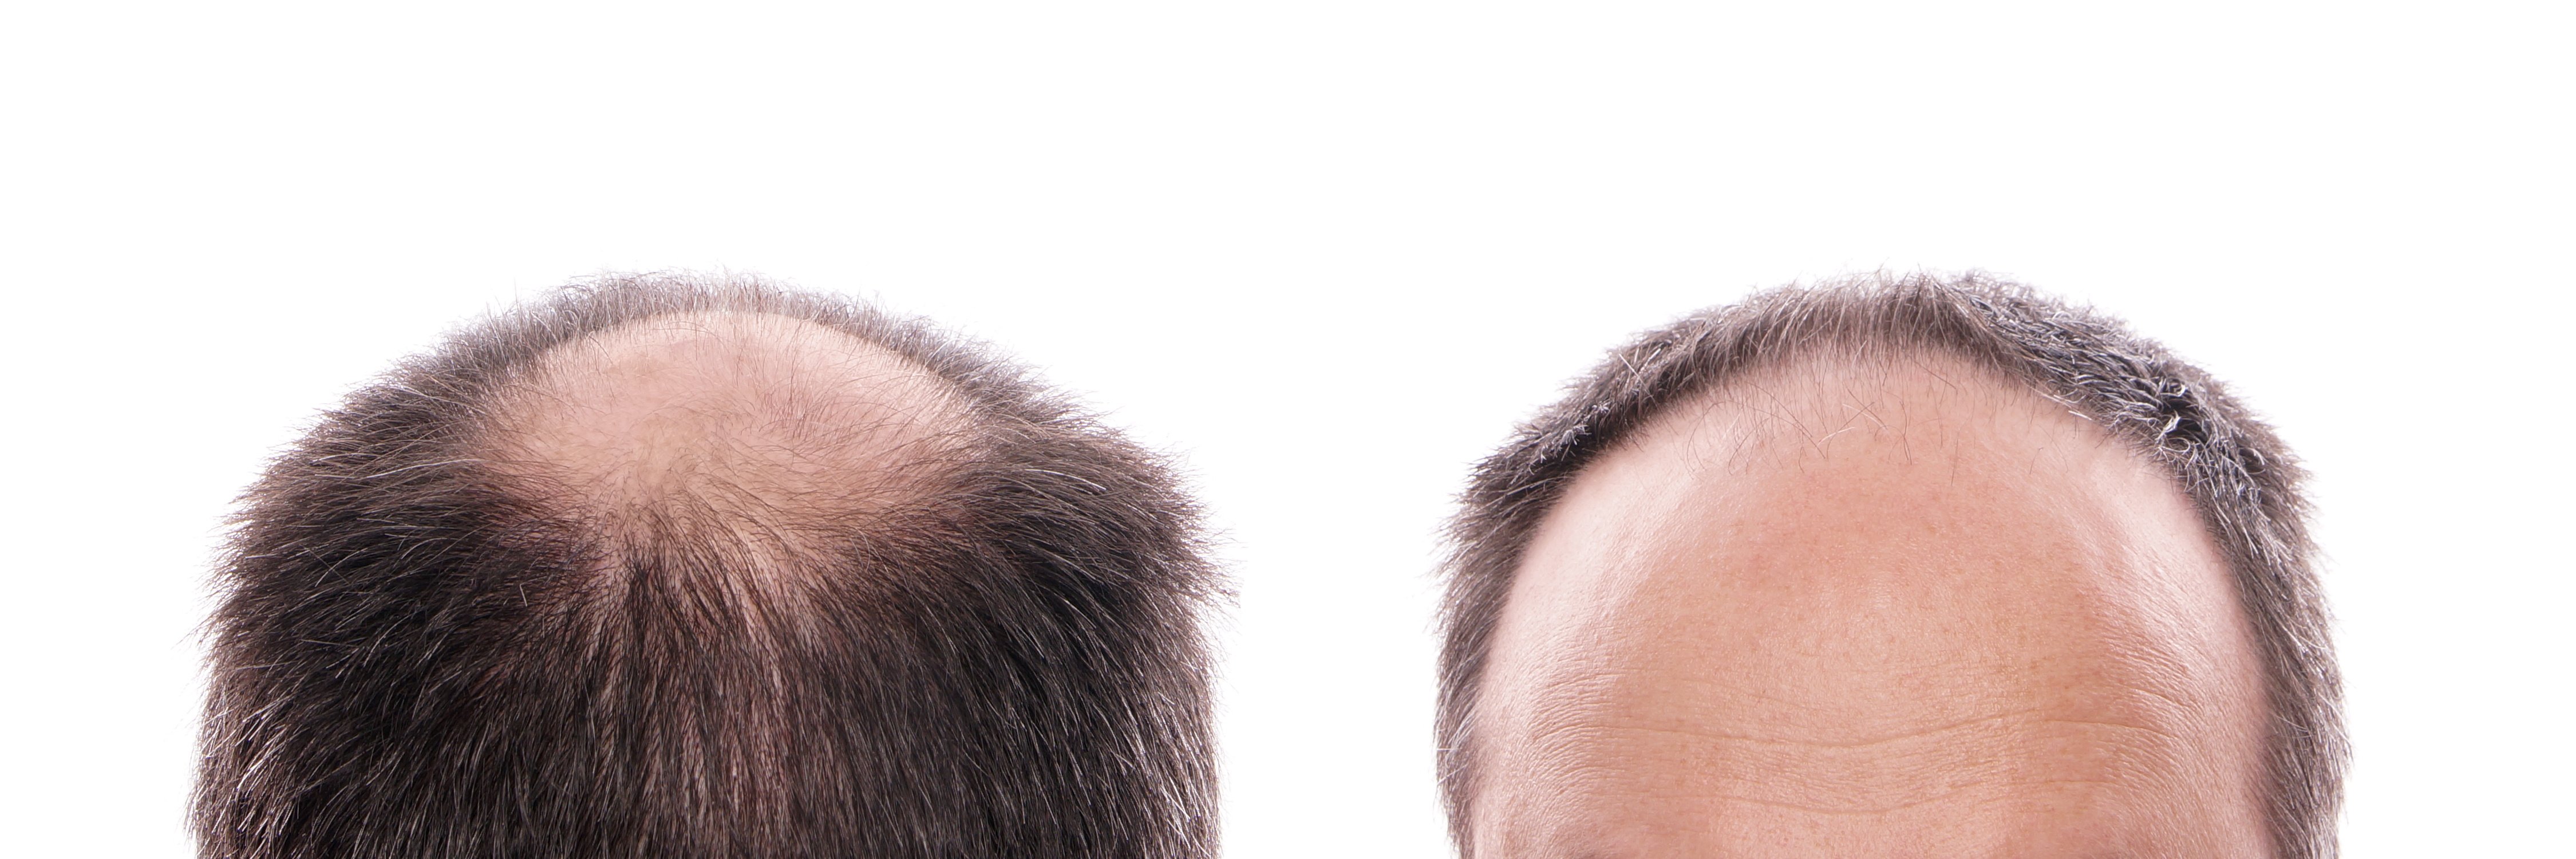 Does Finasteride Cause Shedding? | Assured Pharmacy